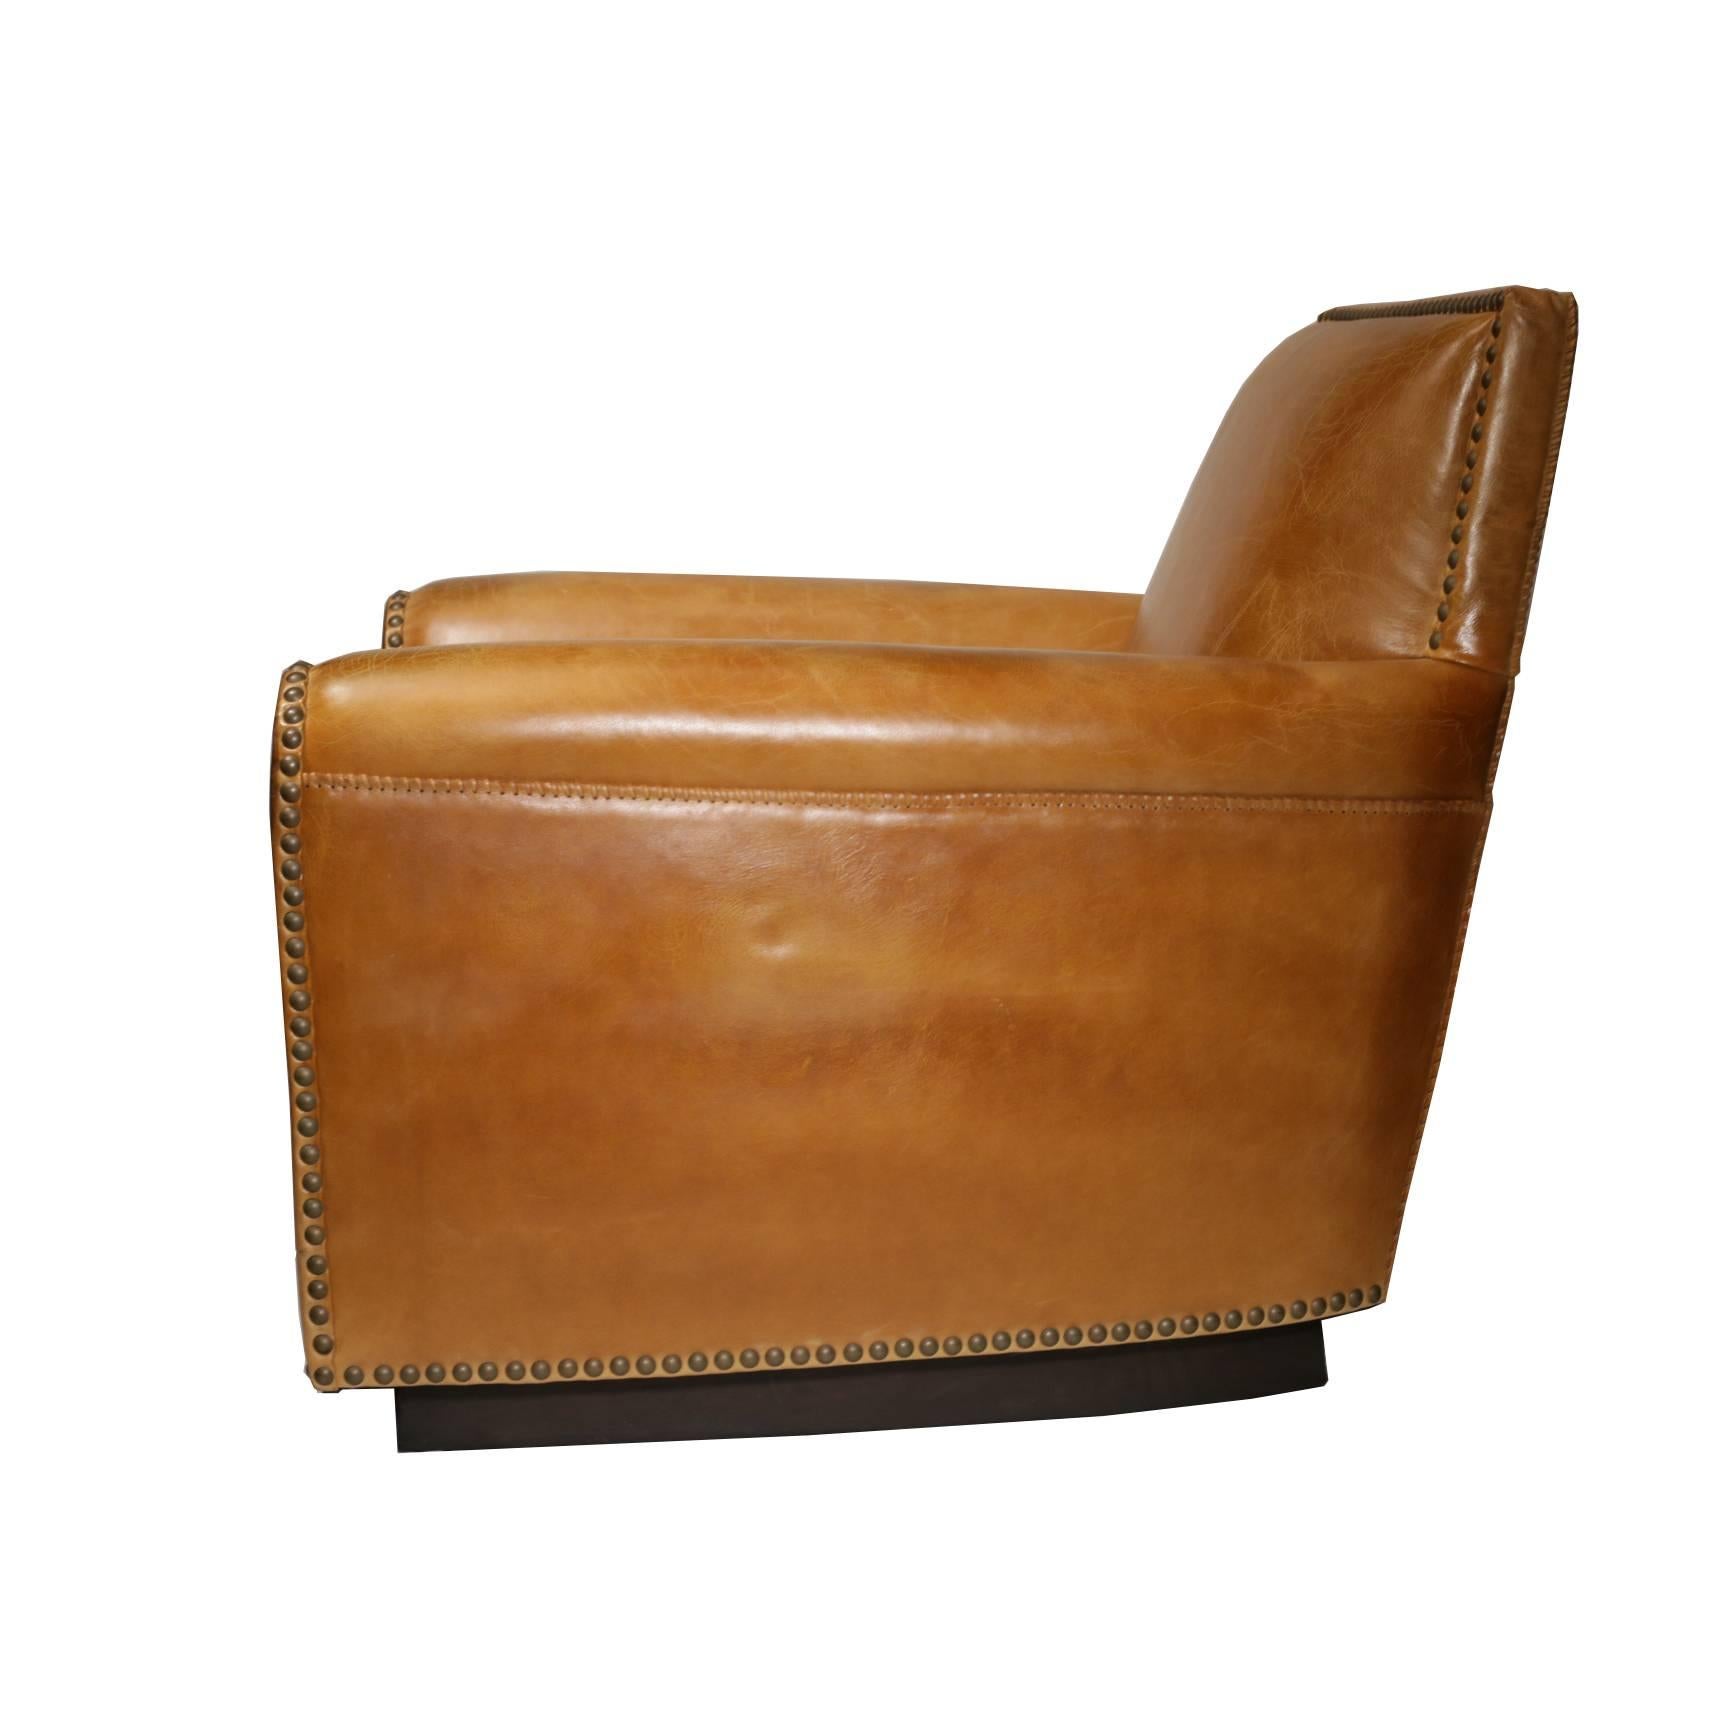 This chair was purchased new and has never been used. 

The Mid-Century lines of a 1940s lounge chair take on a Western spirit in distressed leather with whipstitched edges and bold hammered nickel nailheads.

Chair as shown:
Luxury down seat